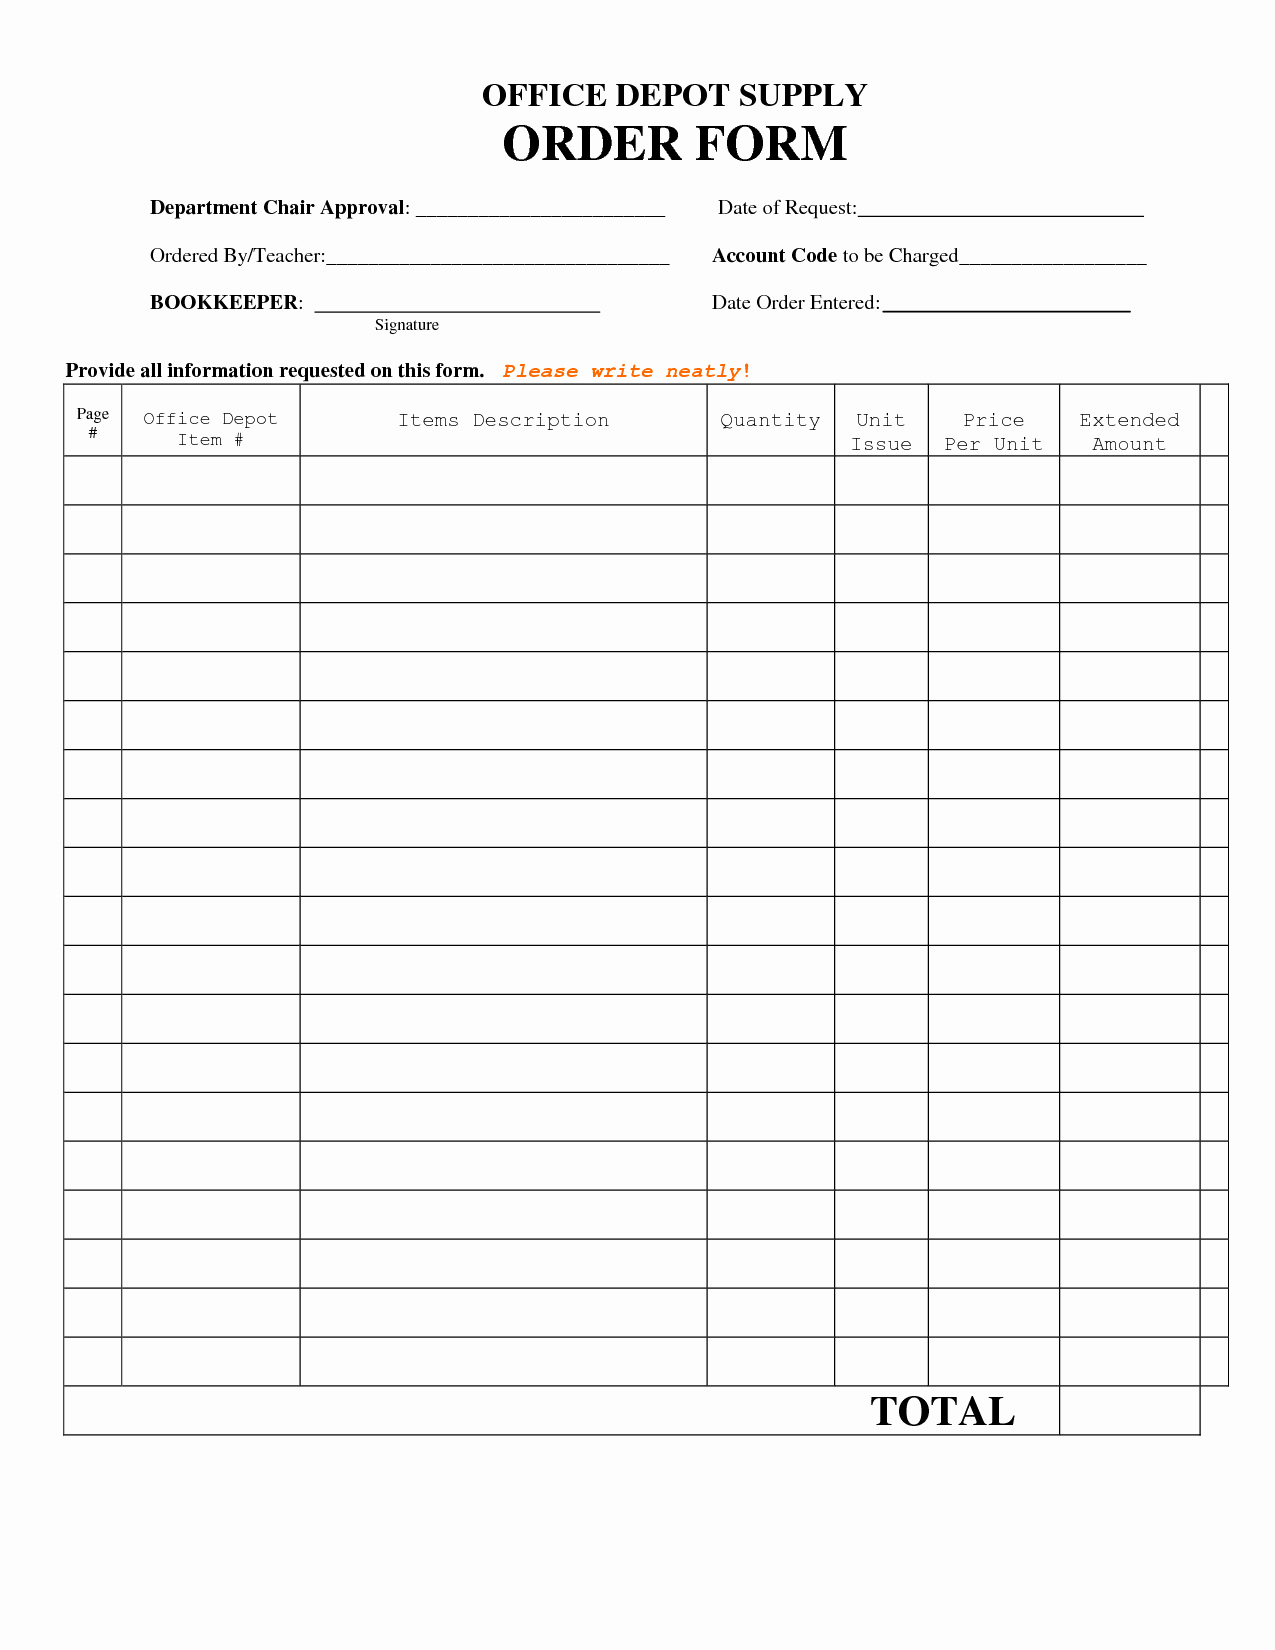 Supply order form Template Awesome Best S Of Standard Fice Supply order form Fice